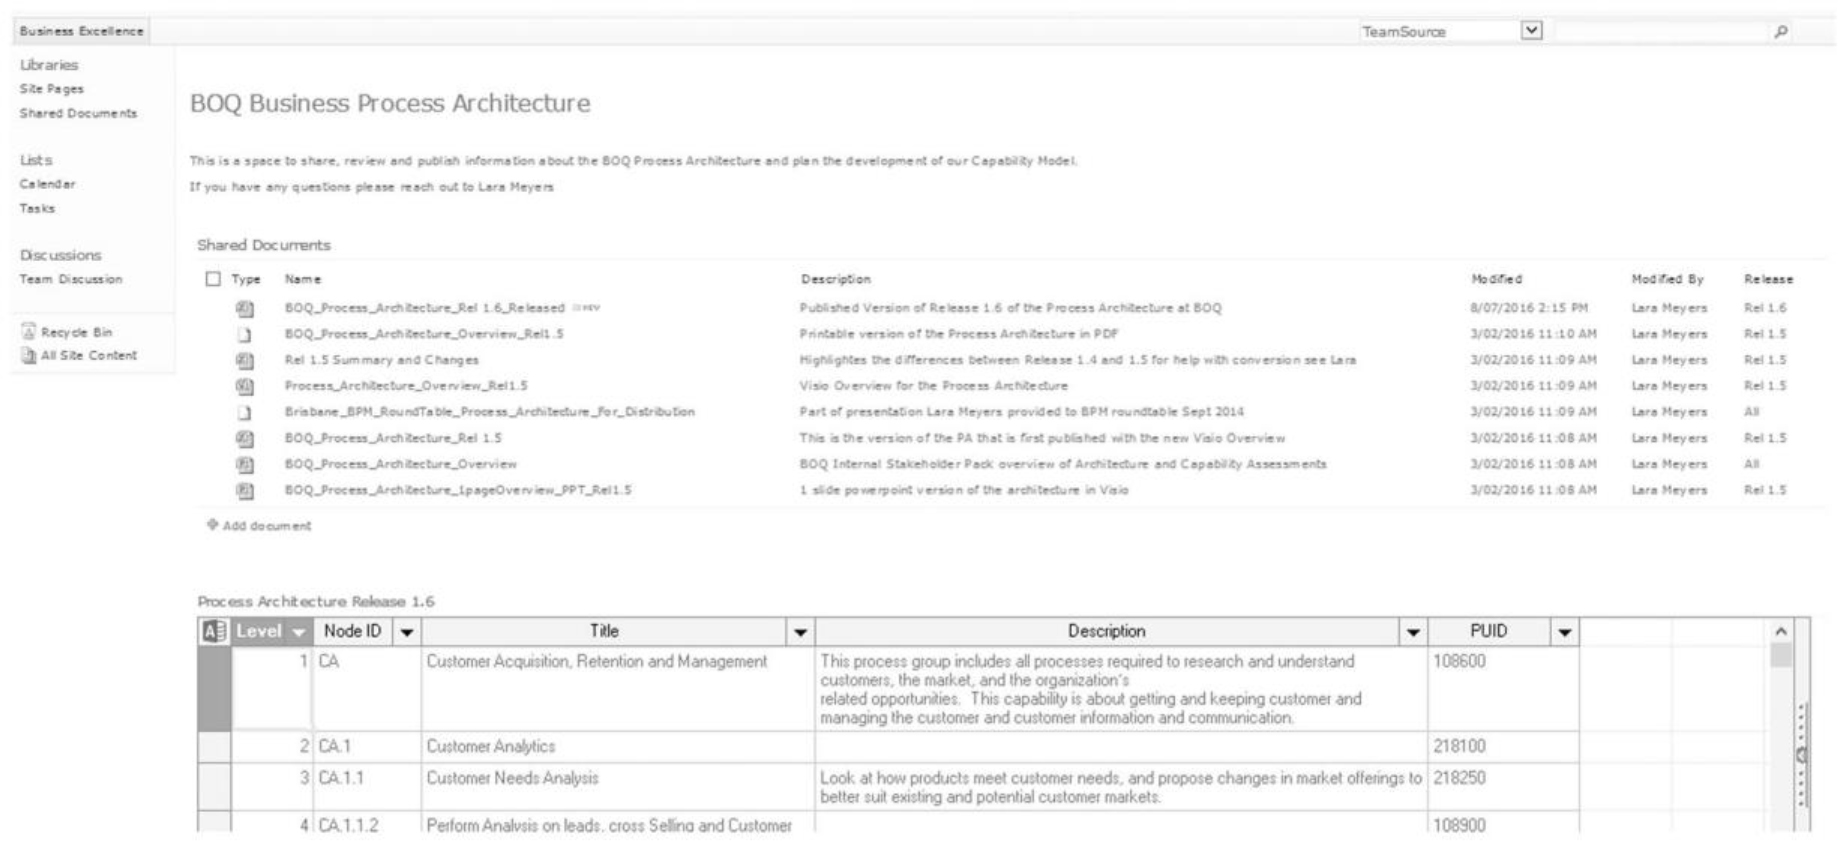 This is a screen shot of the SharePoint site for the process architecture.